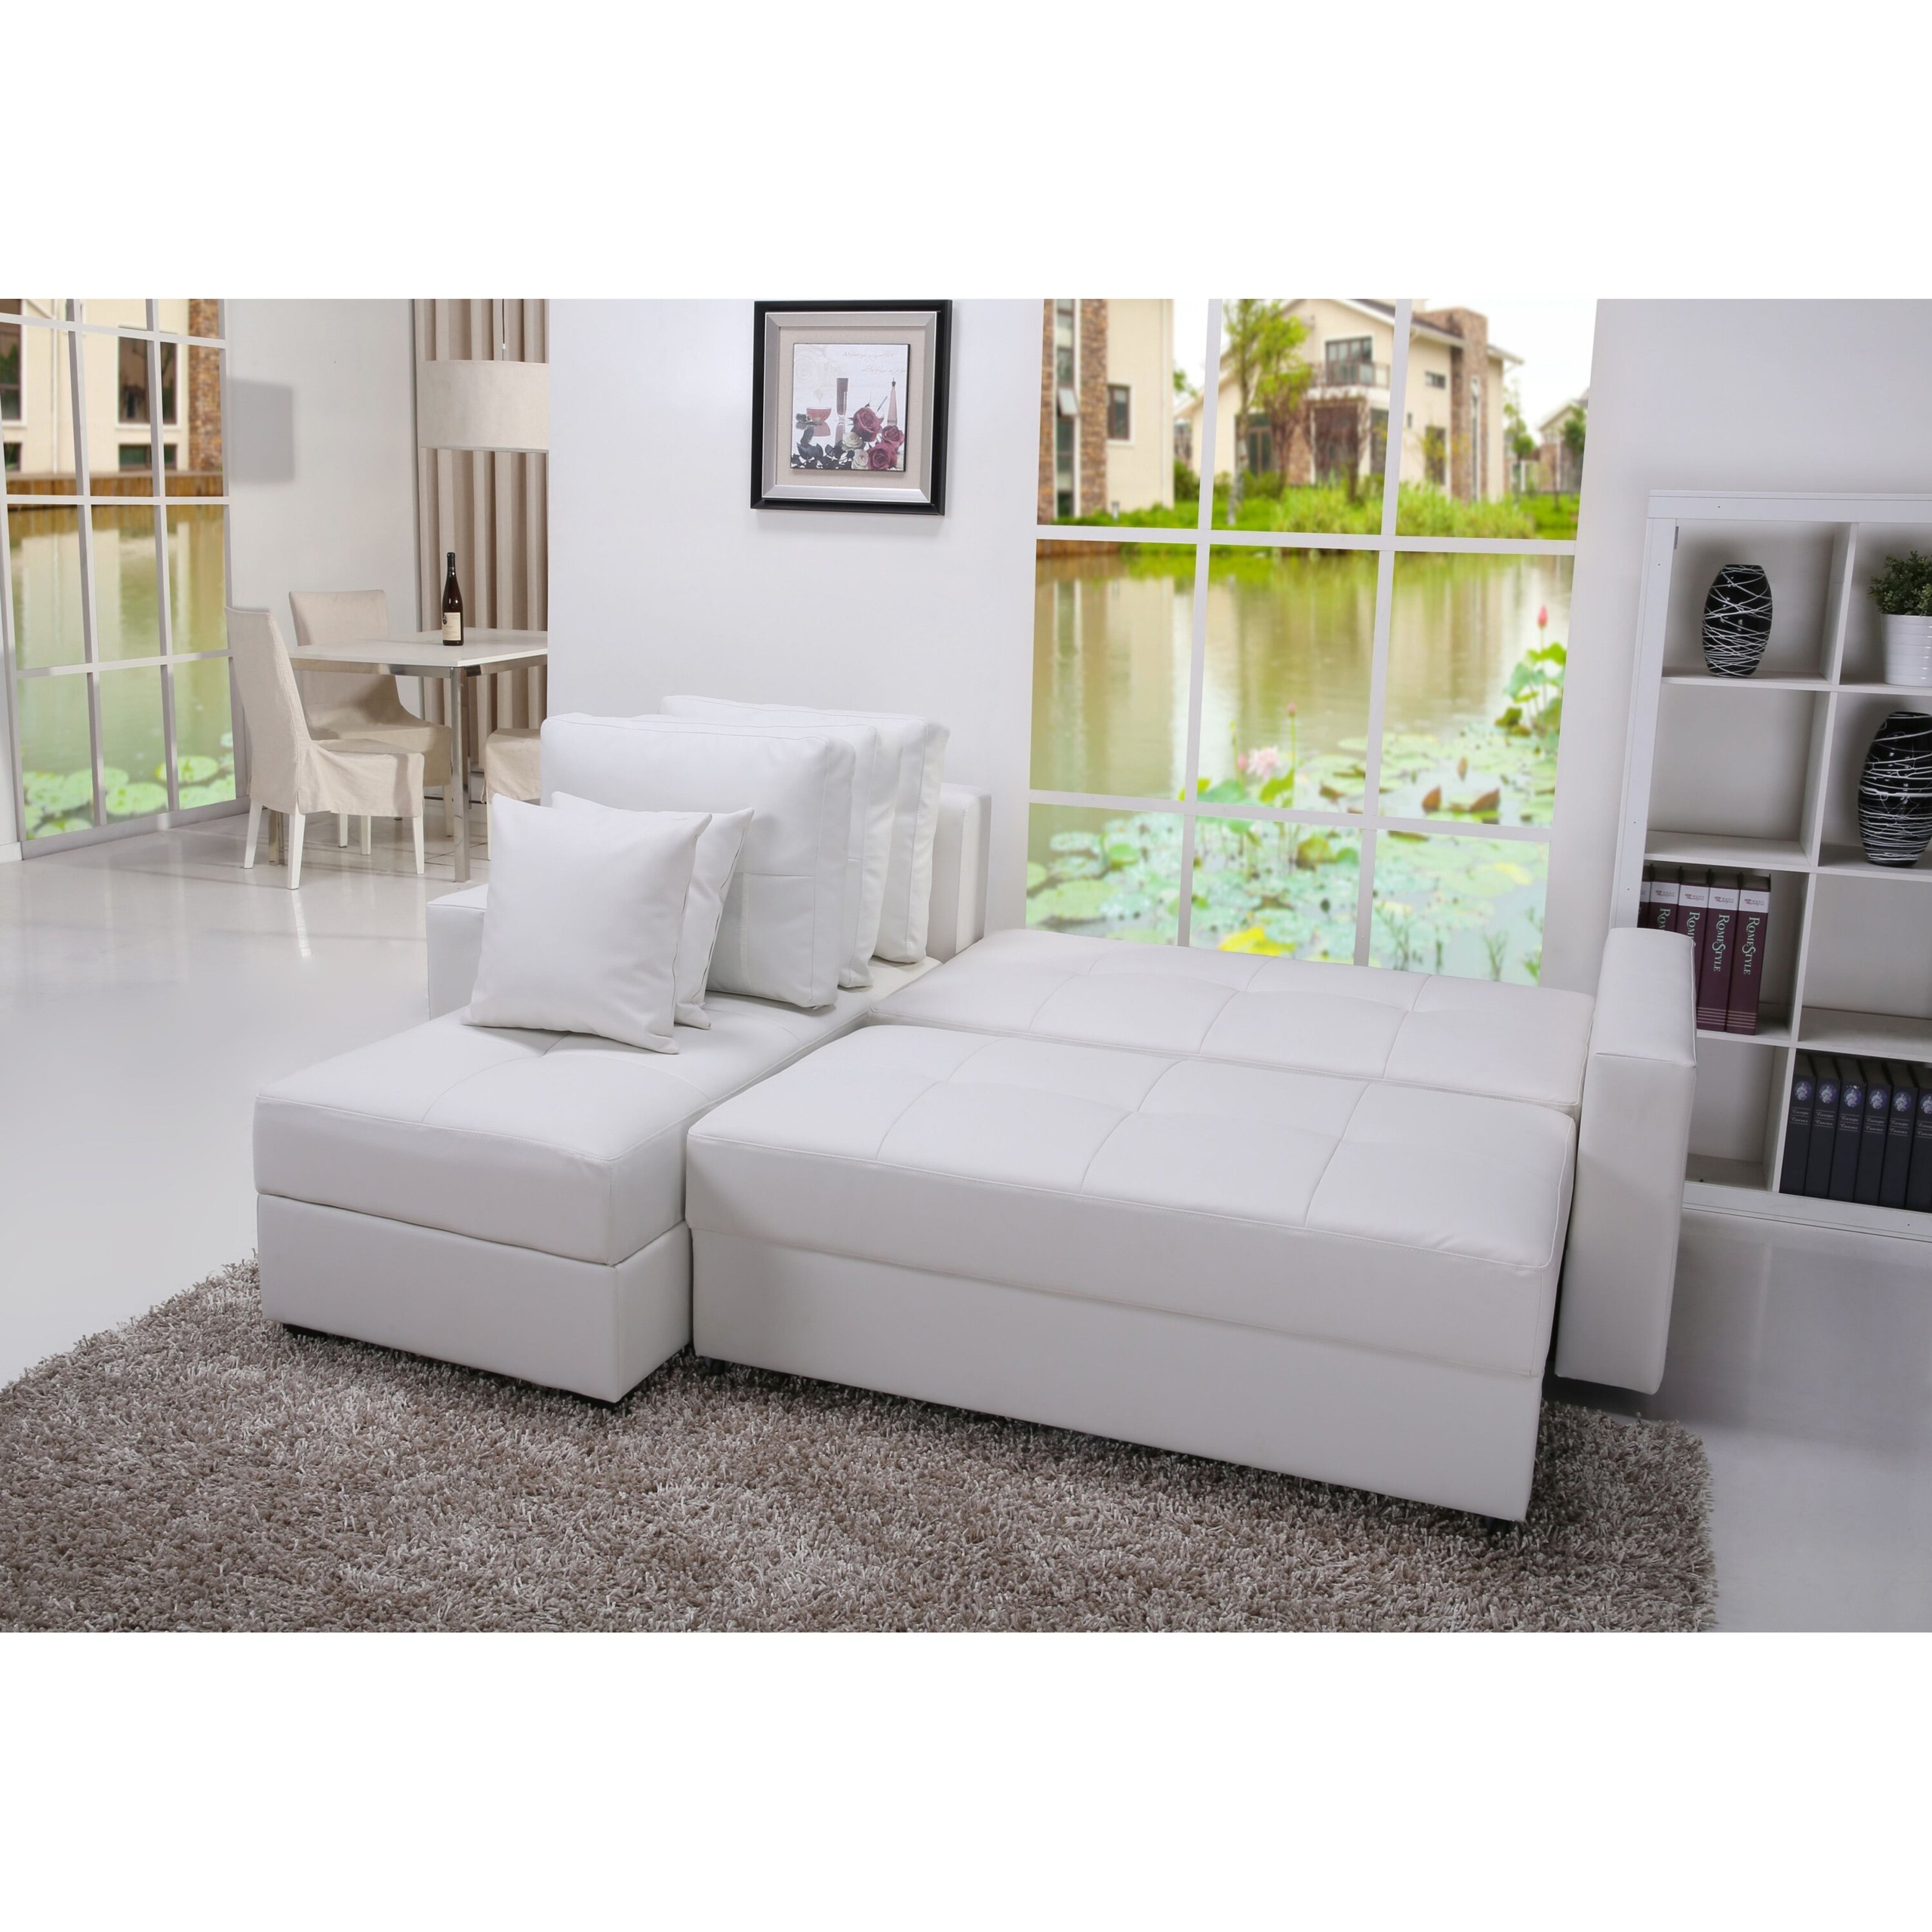 Aspen Convertible Sectional Storage Sofa Bed